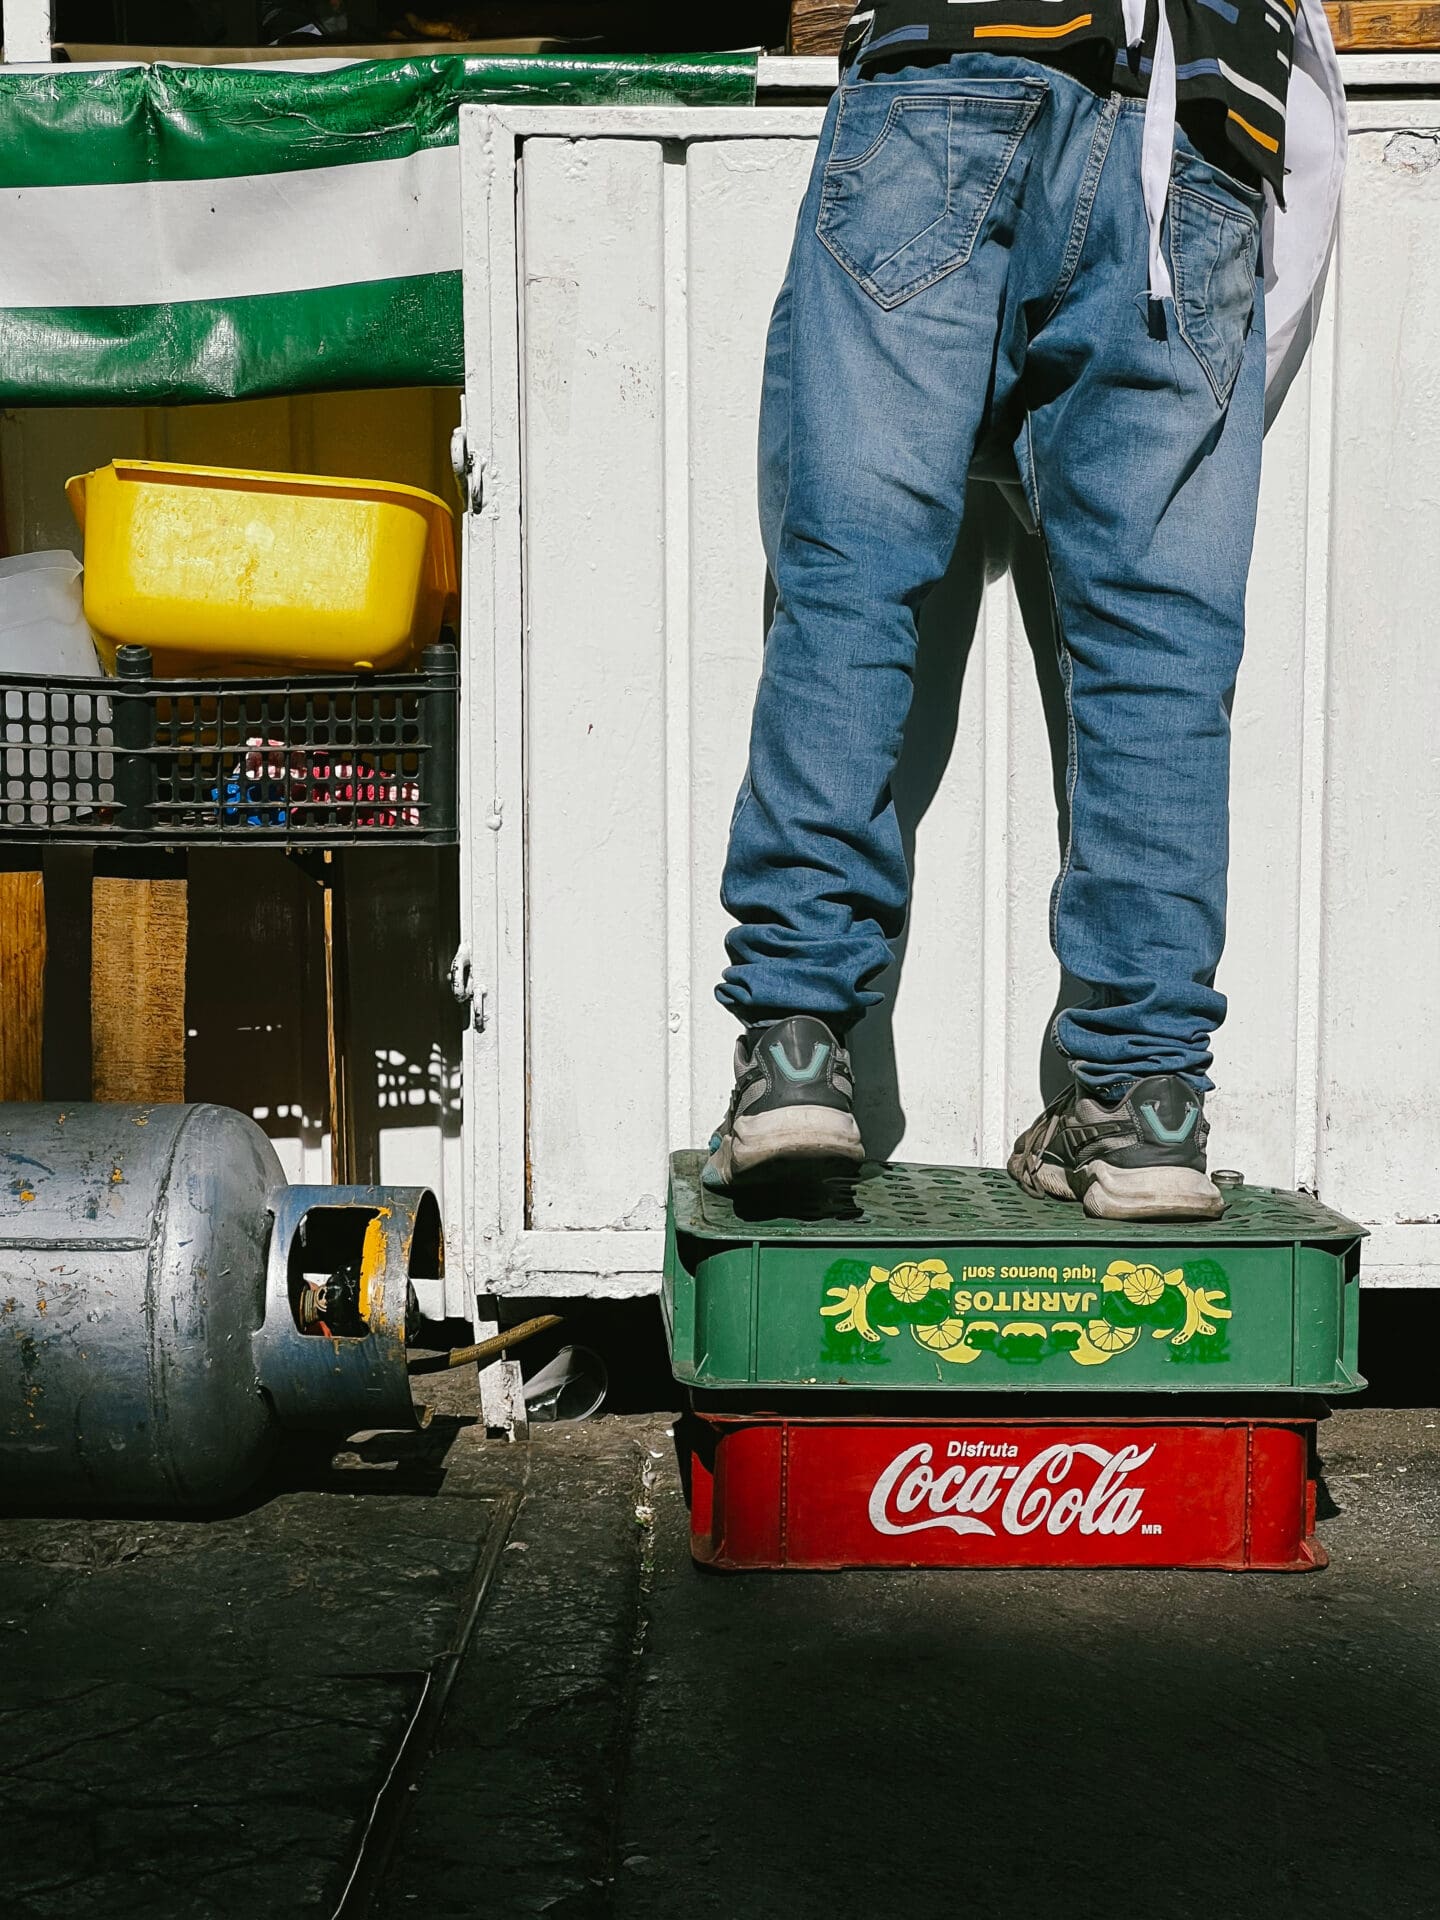 Photographer Manuel Zúñiga on Mexico City | Someone wearing jeans and trainers stands on a red plastic Coca Cola crate and a green crate stacked on top of each other